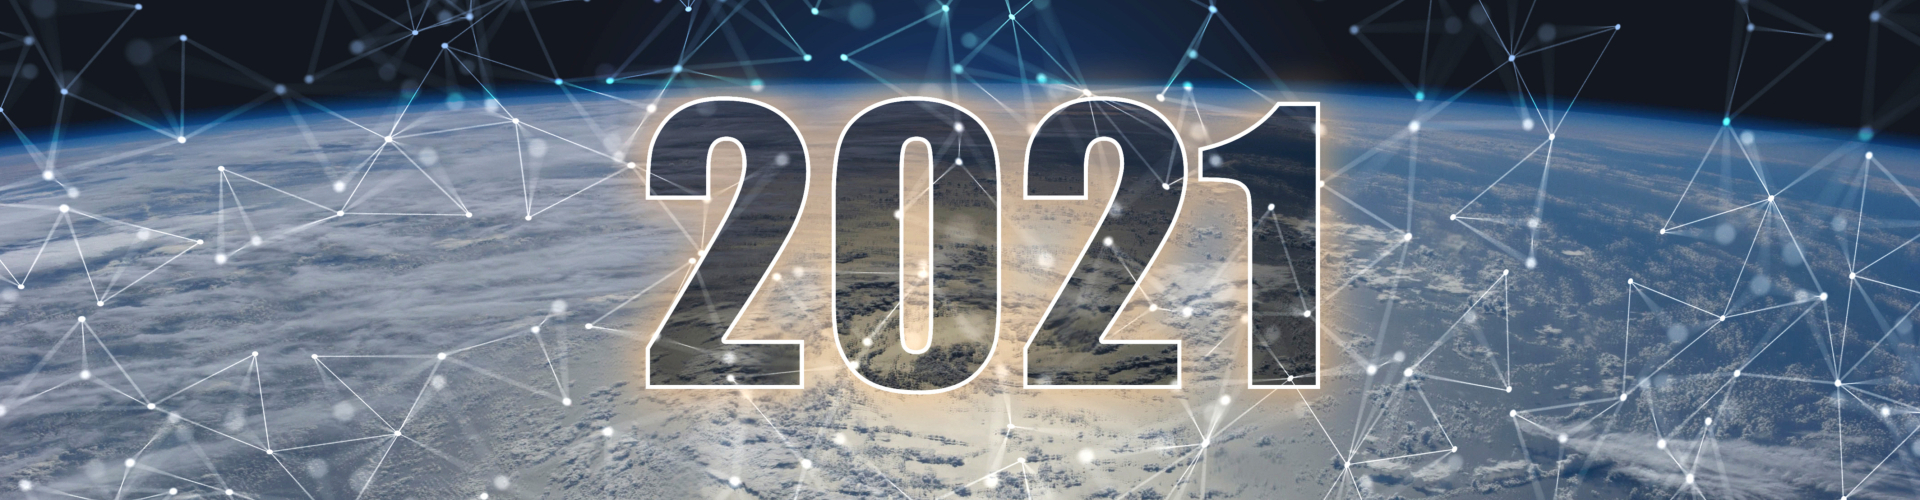 2021on planet earth 1920x500